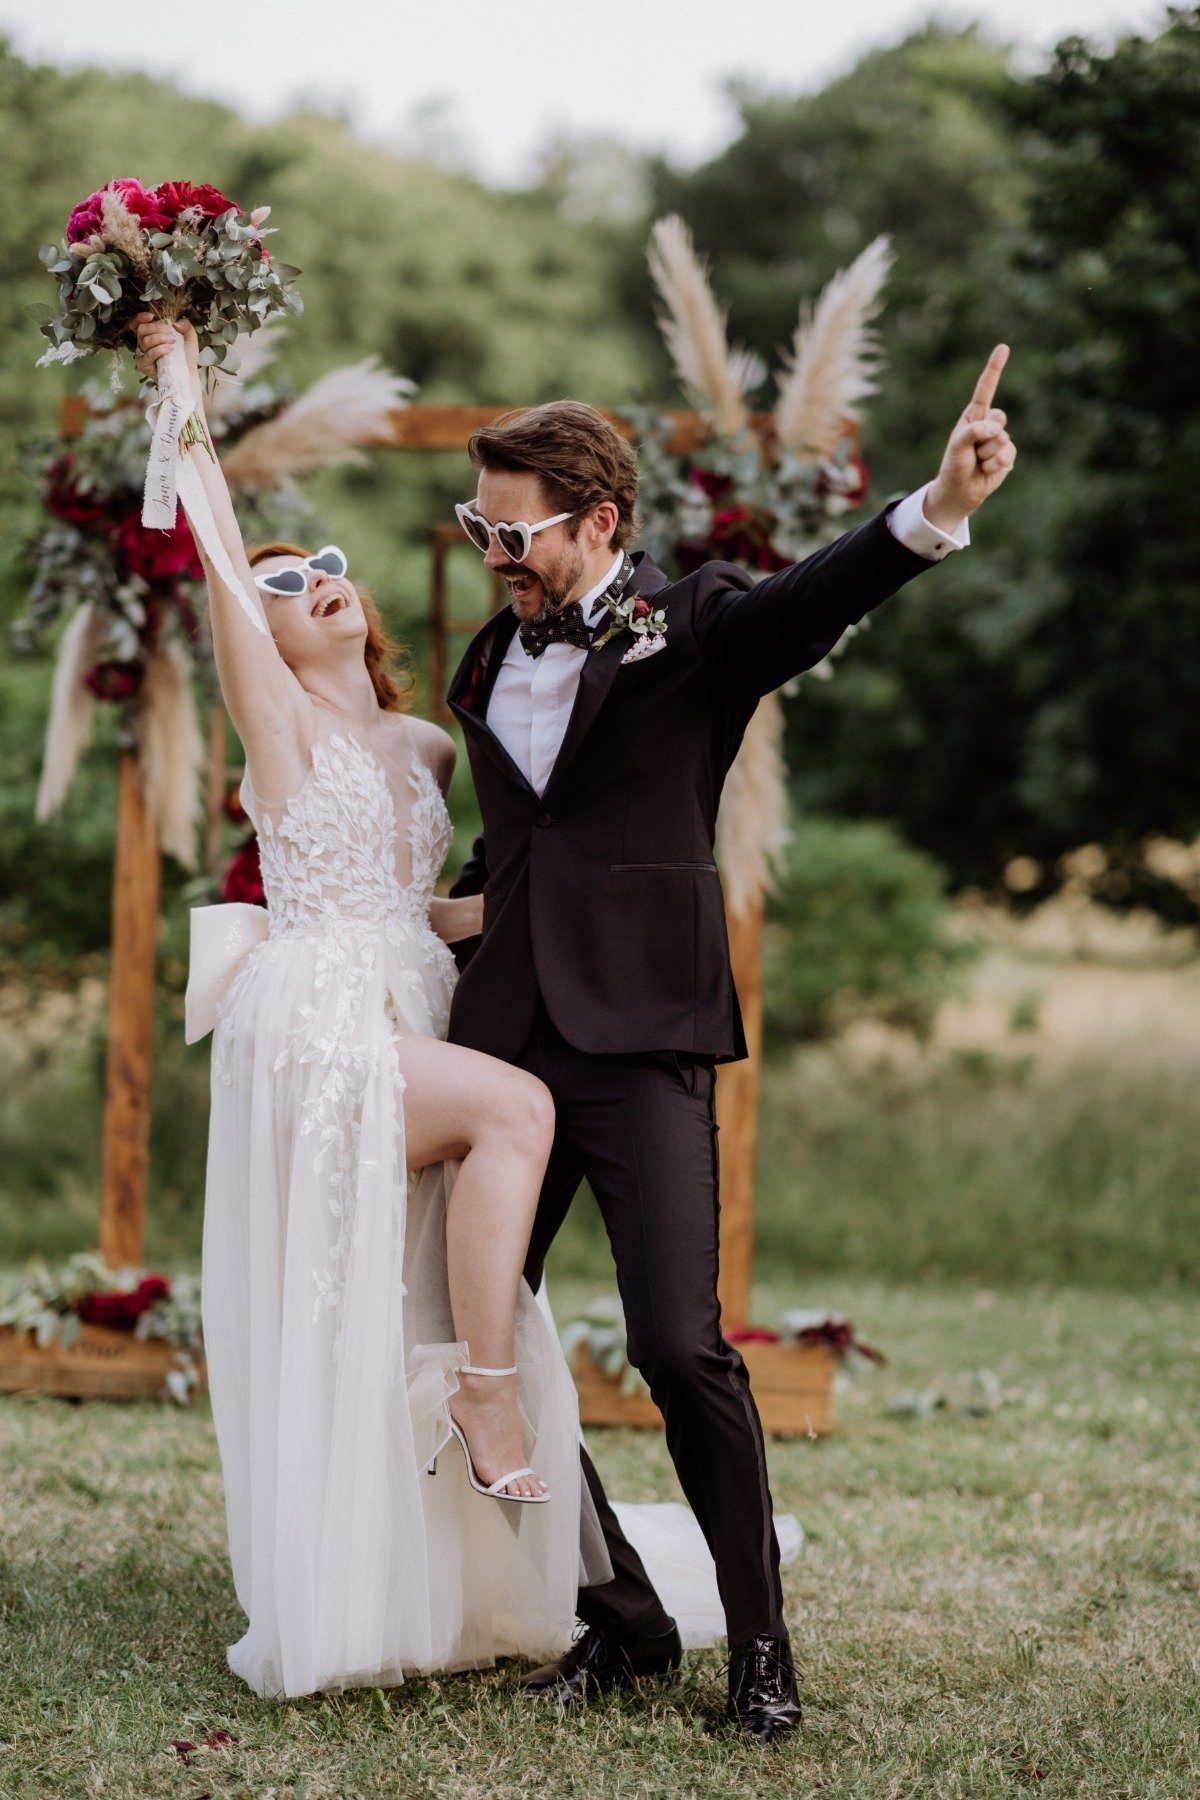 Bride and groom holding arms up wearing heart-shaped sunglasses